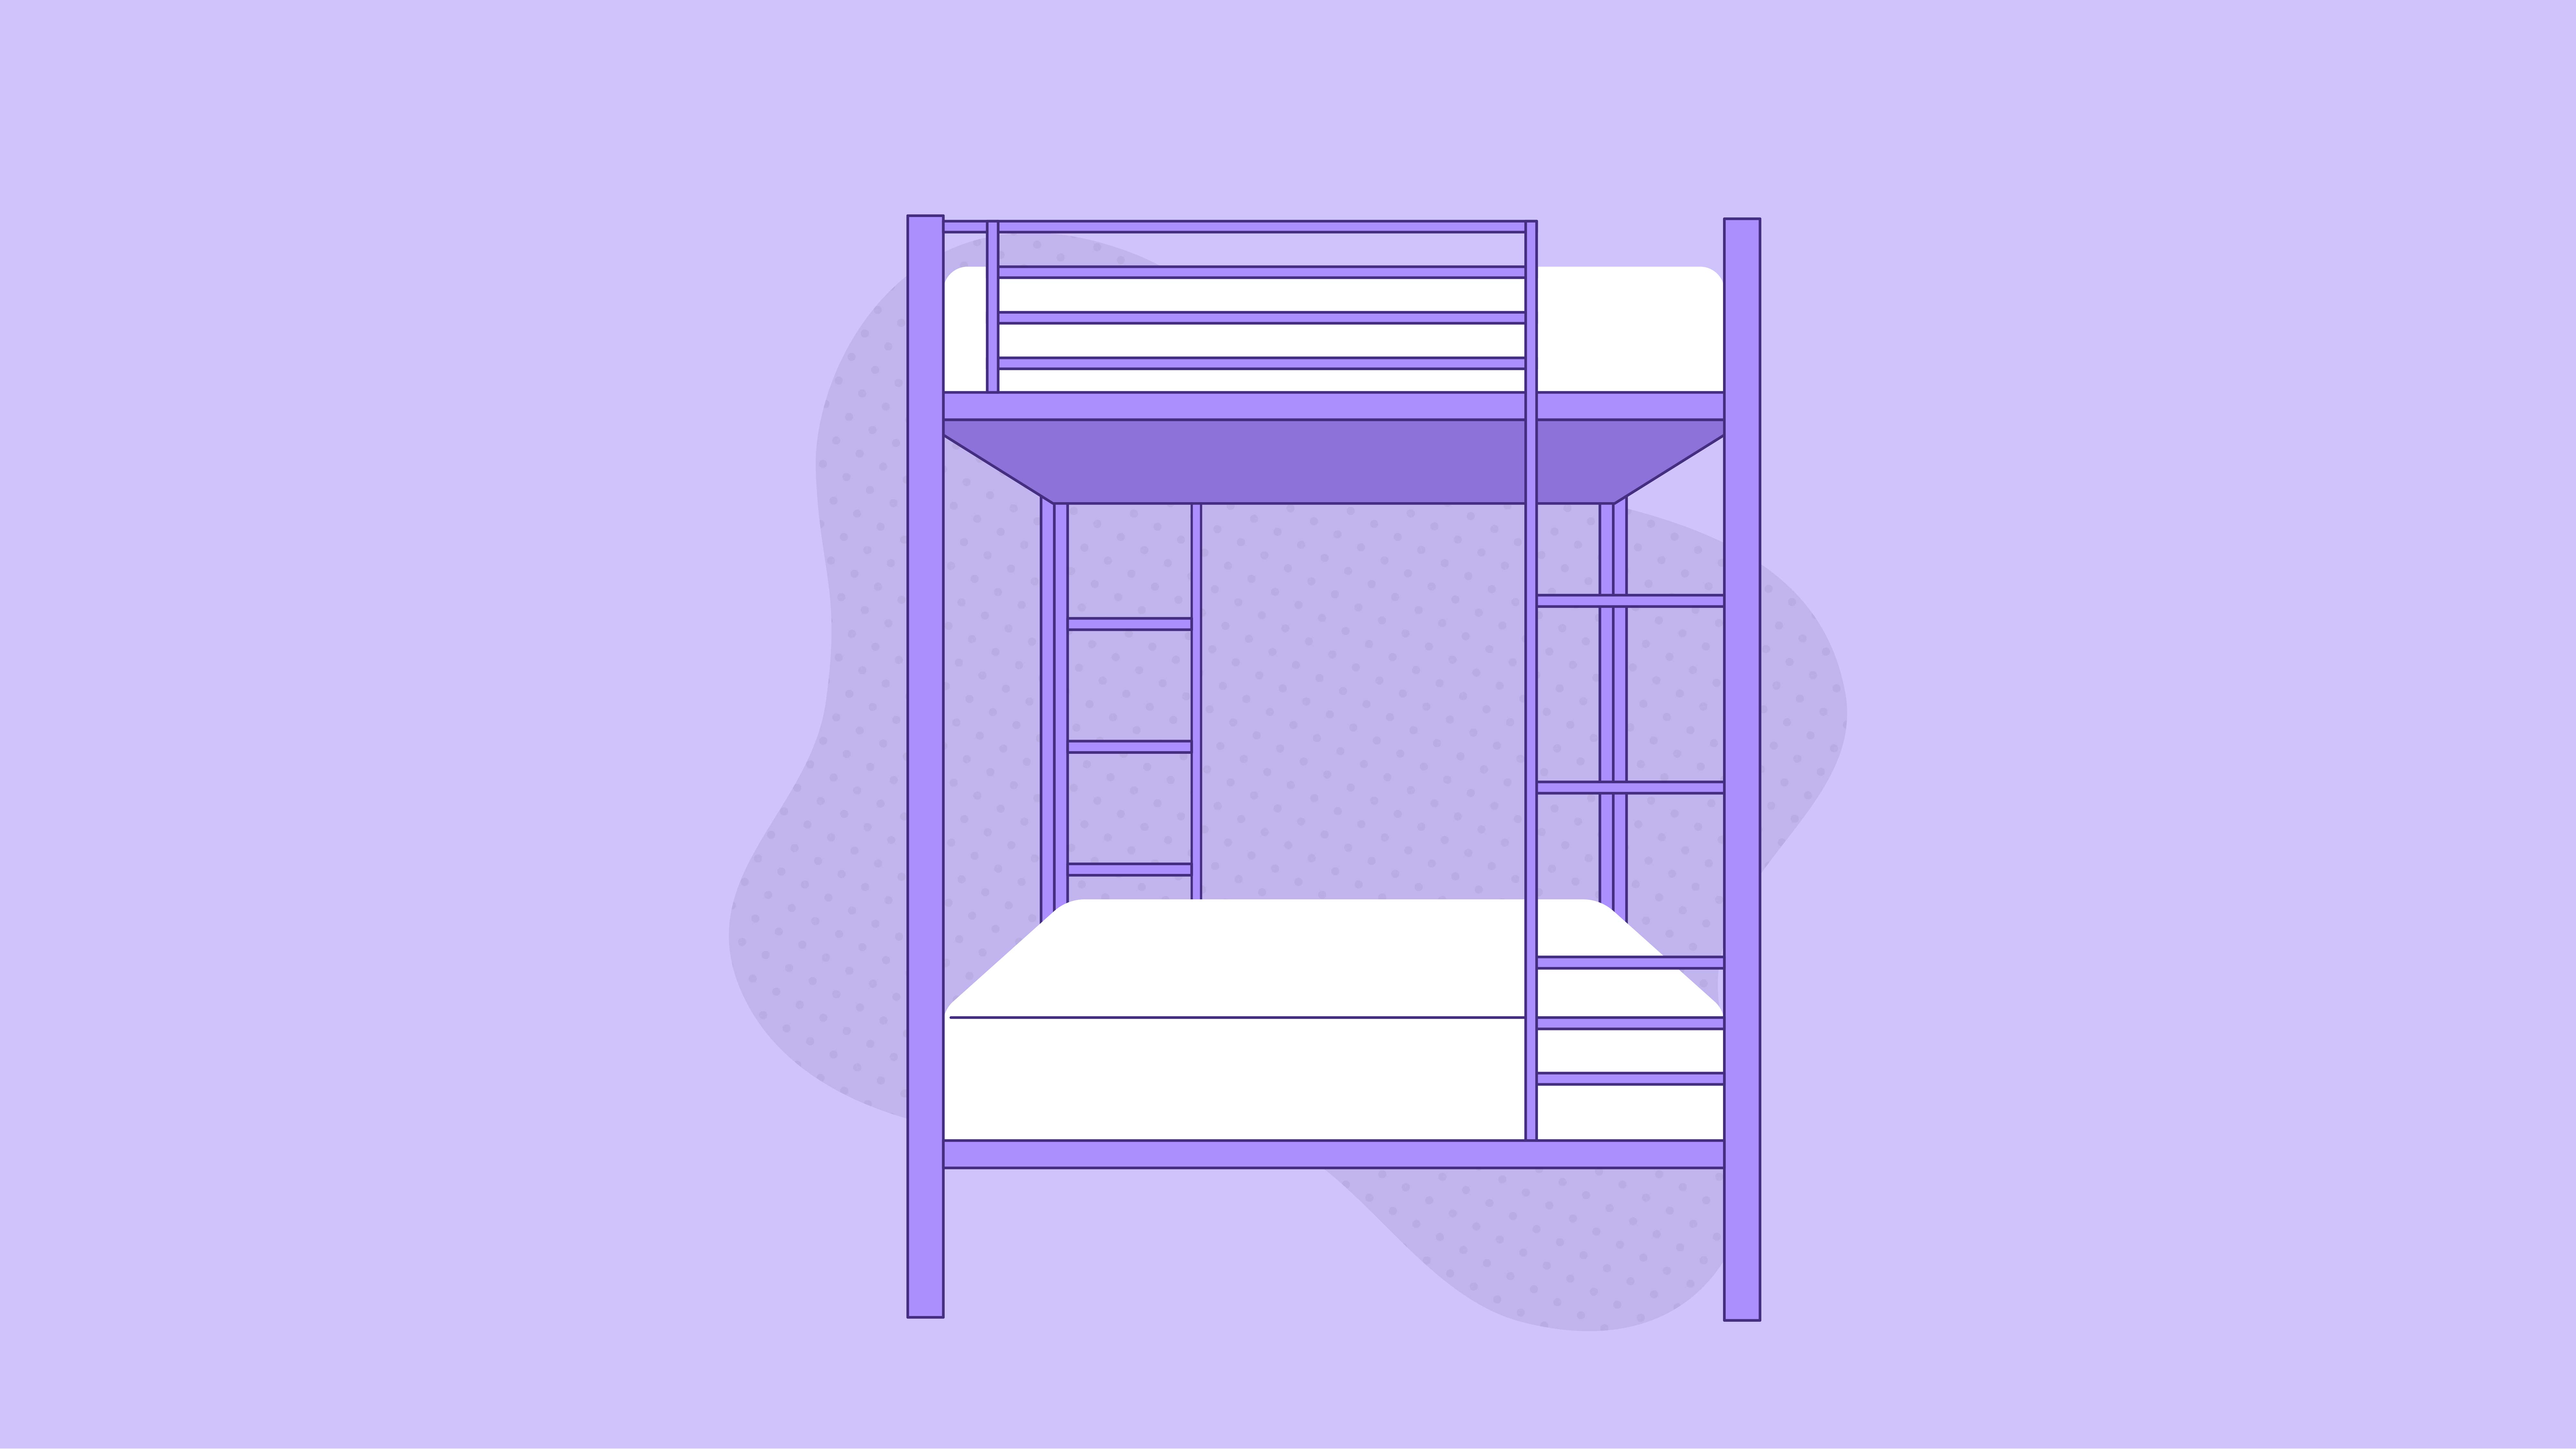 Bunk Bed Dimensions And Sizes Guide, Full Bunk Bed Dimensions